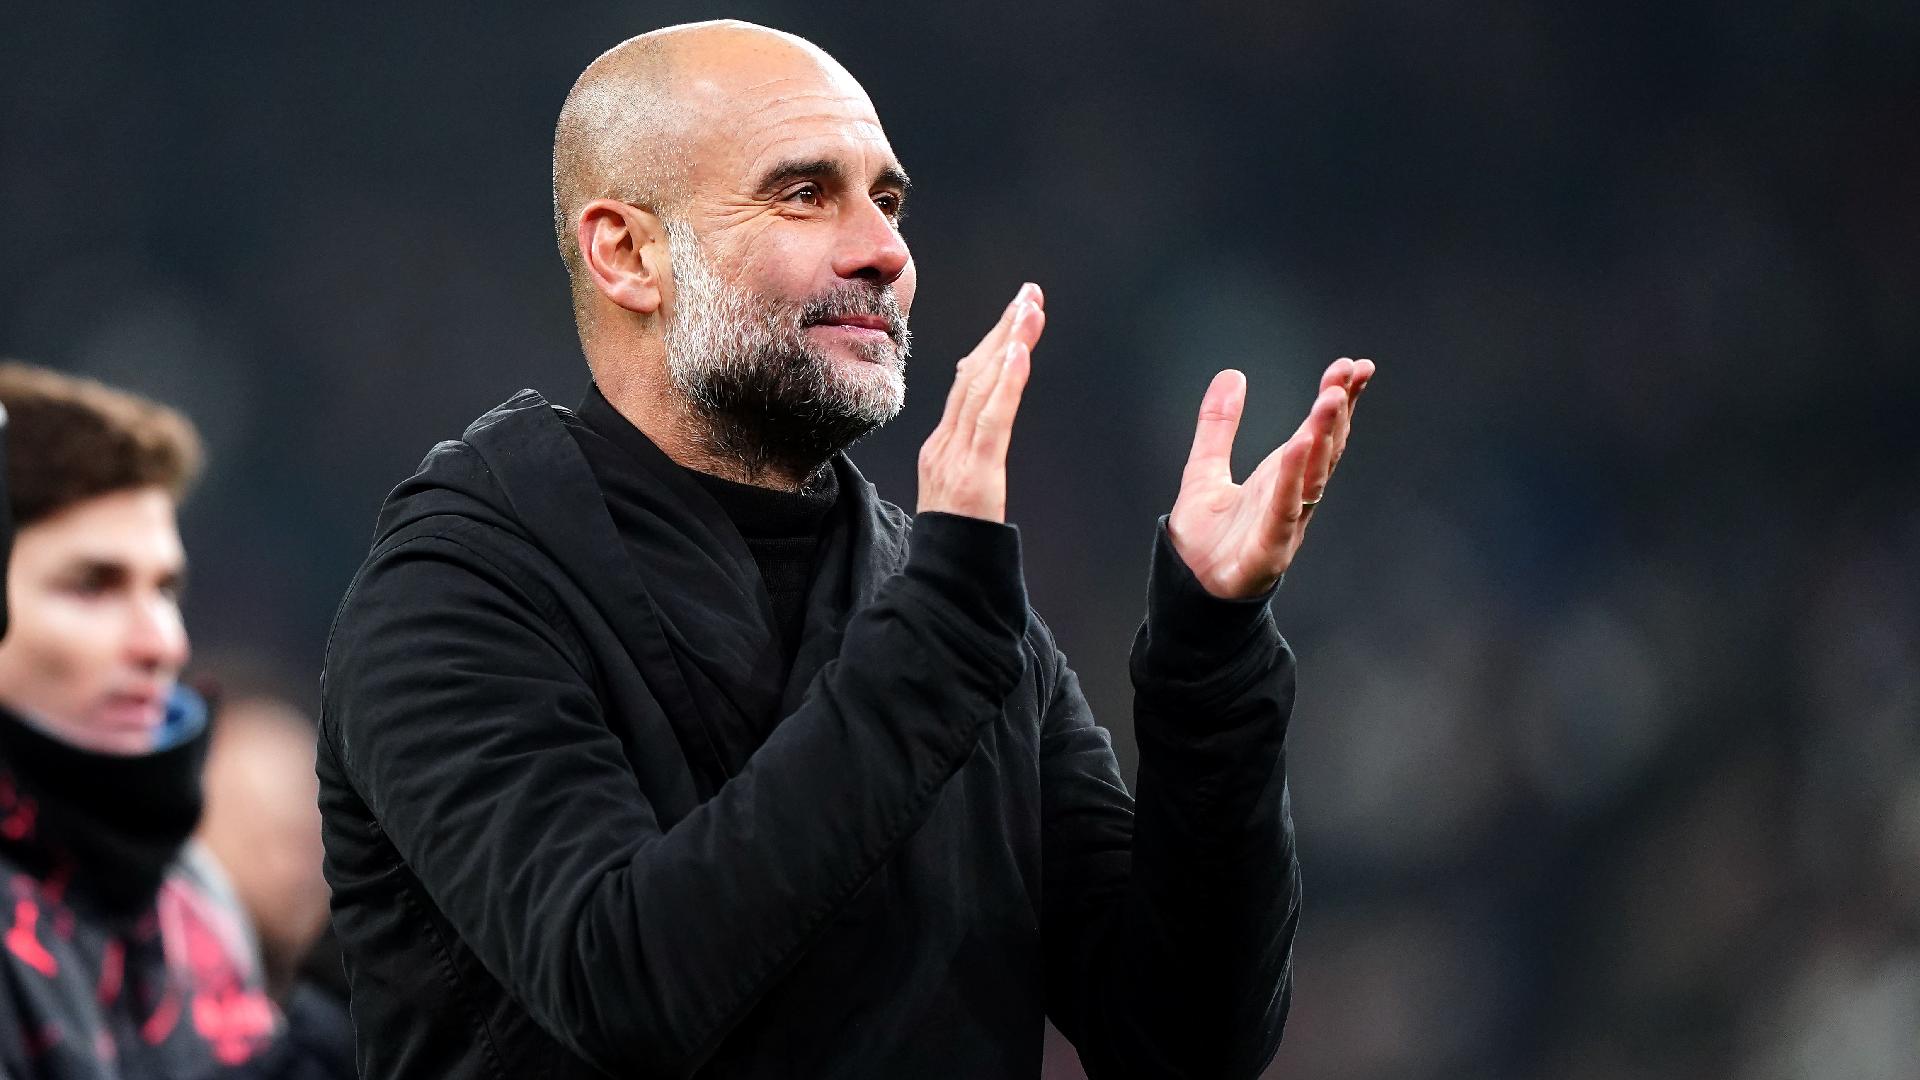 Sir Jim Ratcliffe’s admiration of City ‘a complete honour’ says Pep Guardiola